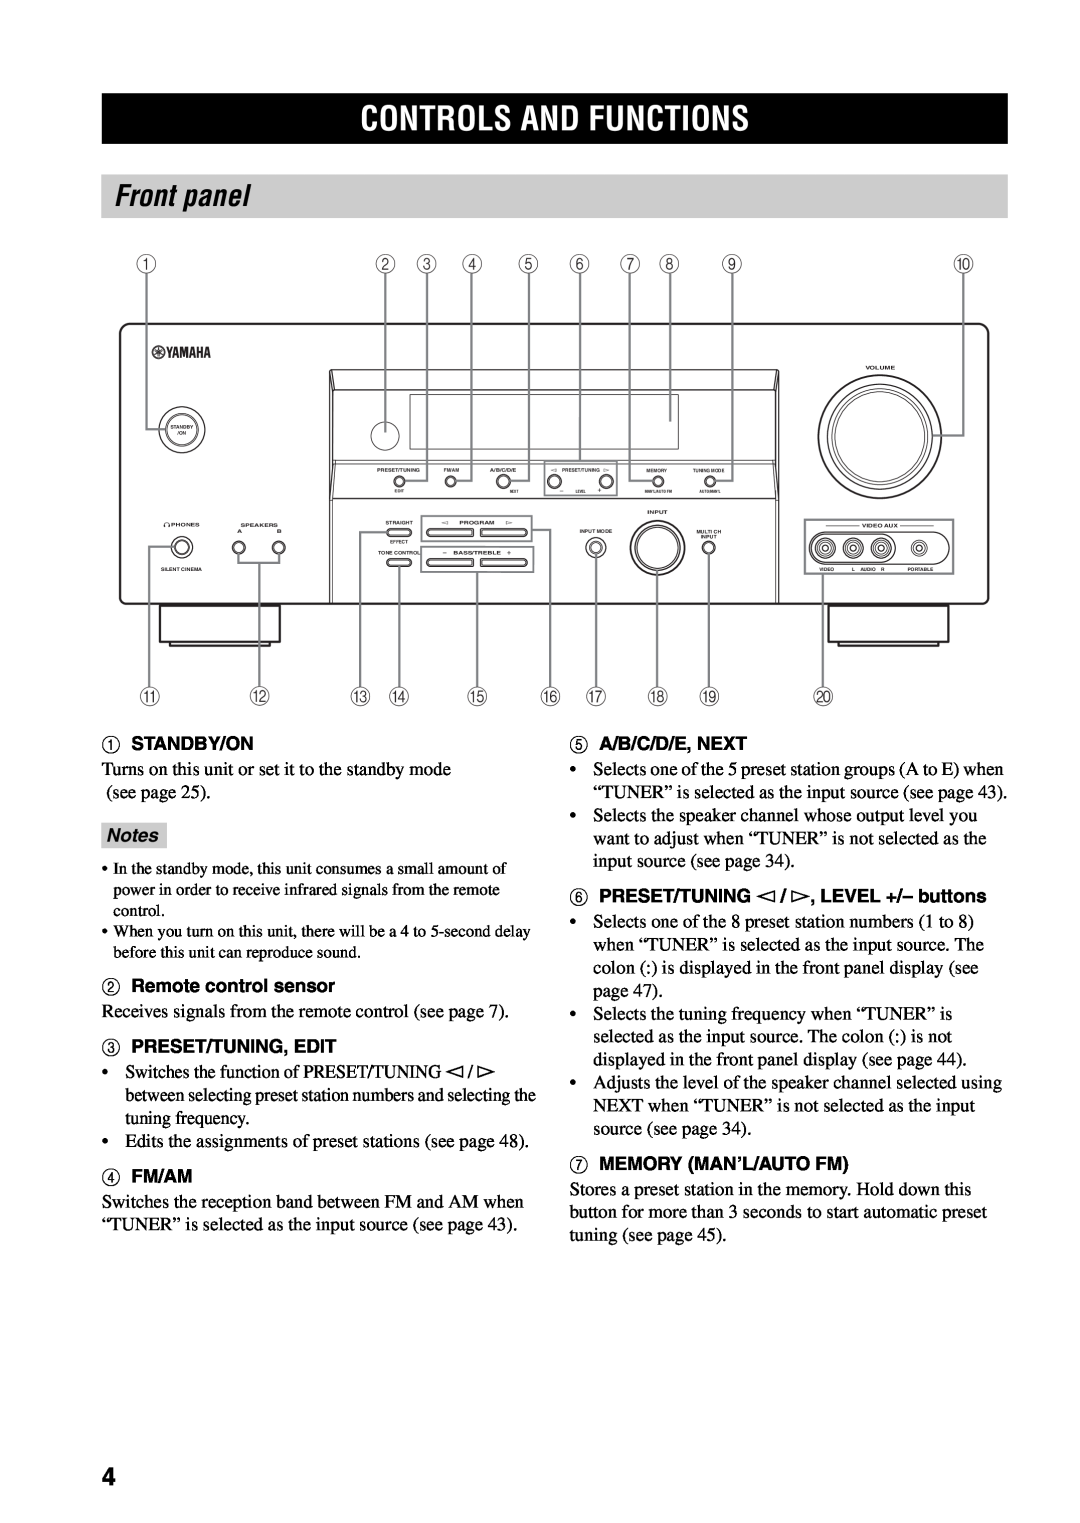 Yamaha RX-V459 owner manual Controls And Functions, Front panel 